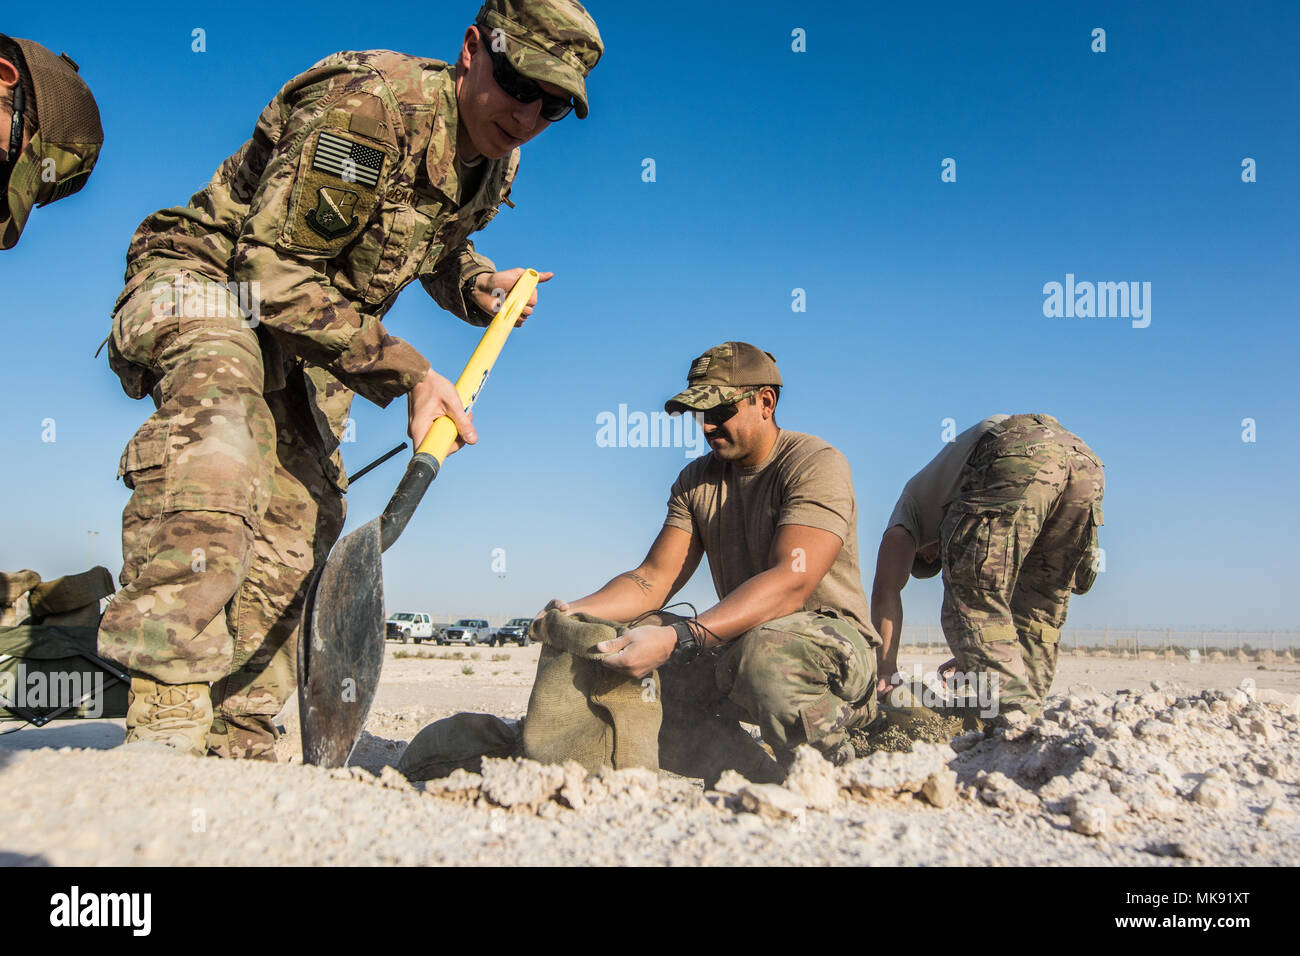 https://c8.alamy.com/comp/MK91XT/us-air-force-senior-airman-luke-bryant-and-staff-sgt-oscar-morales-both-explosive-ordnance-disposal-technicians-assigned-to-the-379th-expeditionary-civil-engineer-squadron-fill-sand-bags-during-a-joint-chemical-threat-training-exercise-at-al-udeid-air-base-qatar-nov-25-2017-the-379th-eod-flight-379th-bioenvironmental-engineering-flight-and-379th-readiness-and-emergency-management-flight-responded-to-a-simulated-chemical-agent-threat-the-sandbags-were-used-to-secure-munitions-while-they-were-being-assessed-by-eod-technicians-us-air-national-guard-photo-by-staff-sgt-patrick-even-MK91XT.jpg